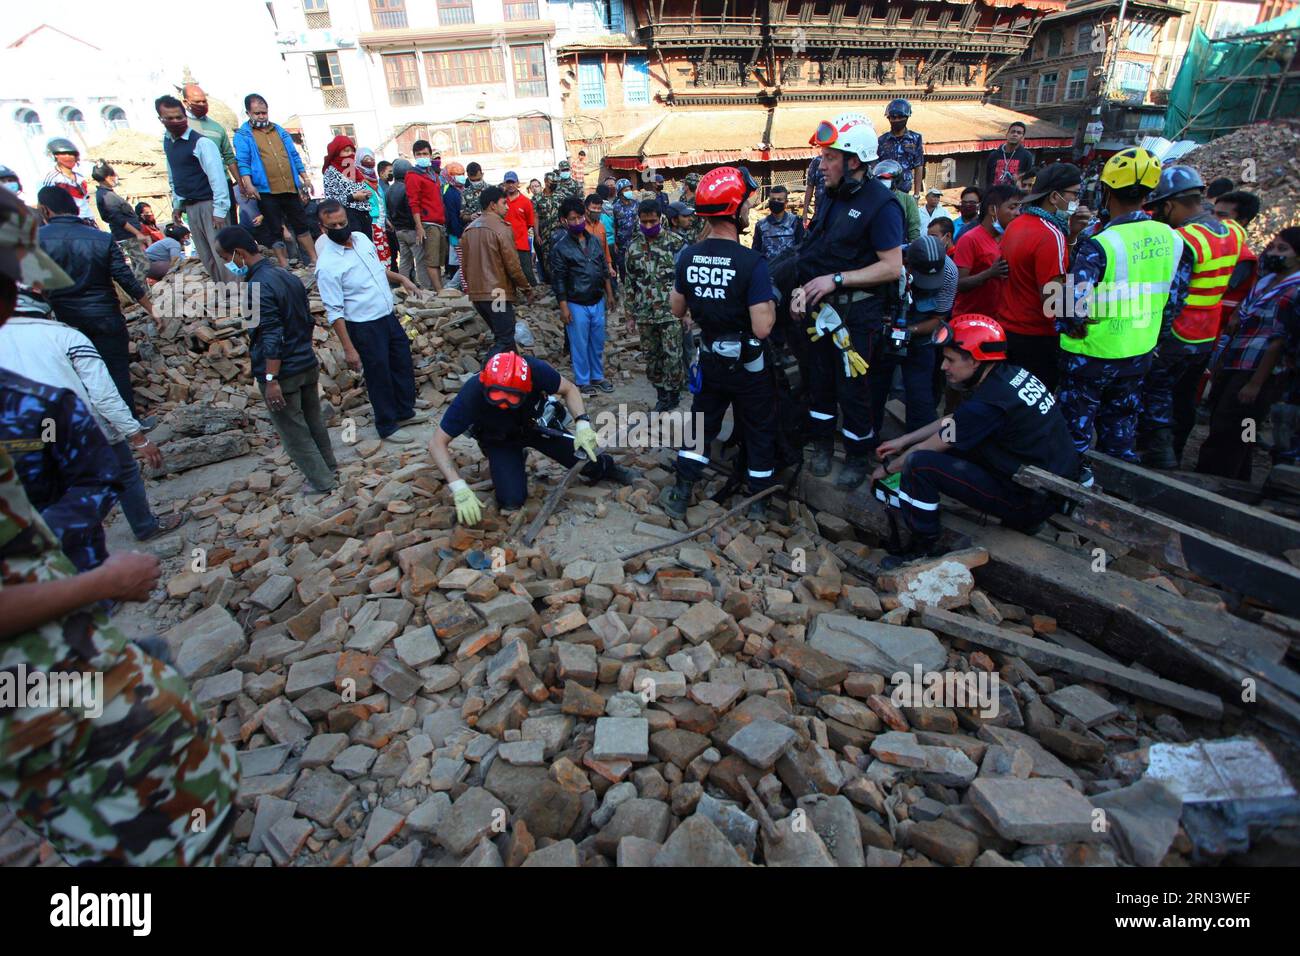 (150427) -- KATHMANDU, April 27, 2015 -- Rescuers search for victims on the bedris of a fallen temple at Hanuman Dhoka Durbar Square after the massive earthquake in Kathmandu, Nepal, April 27, 2015. Death toll climbed to 3,815 following a massive 7.9-magnitude earthquake in Nepal Saturday, while 7,046 sustained injuries, says the country s ministry of foreign affairs Monday. ) NEPAL-KATHMANDU-EARTHQUAKE-AFTERMATH SunilxSharma PUBLICATIONxNOTxINxCHN   Kathmandu April 27 2015 Rescue Search for Victims ON The  of a Fall Temple AT Hanuman Dhoka Durbar Square After The Massive Earthquake in Kathman Stock Photo